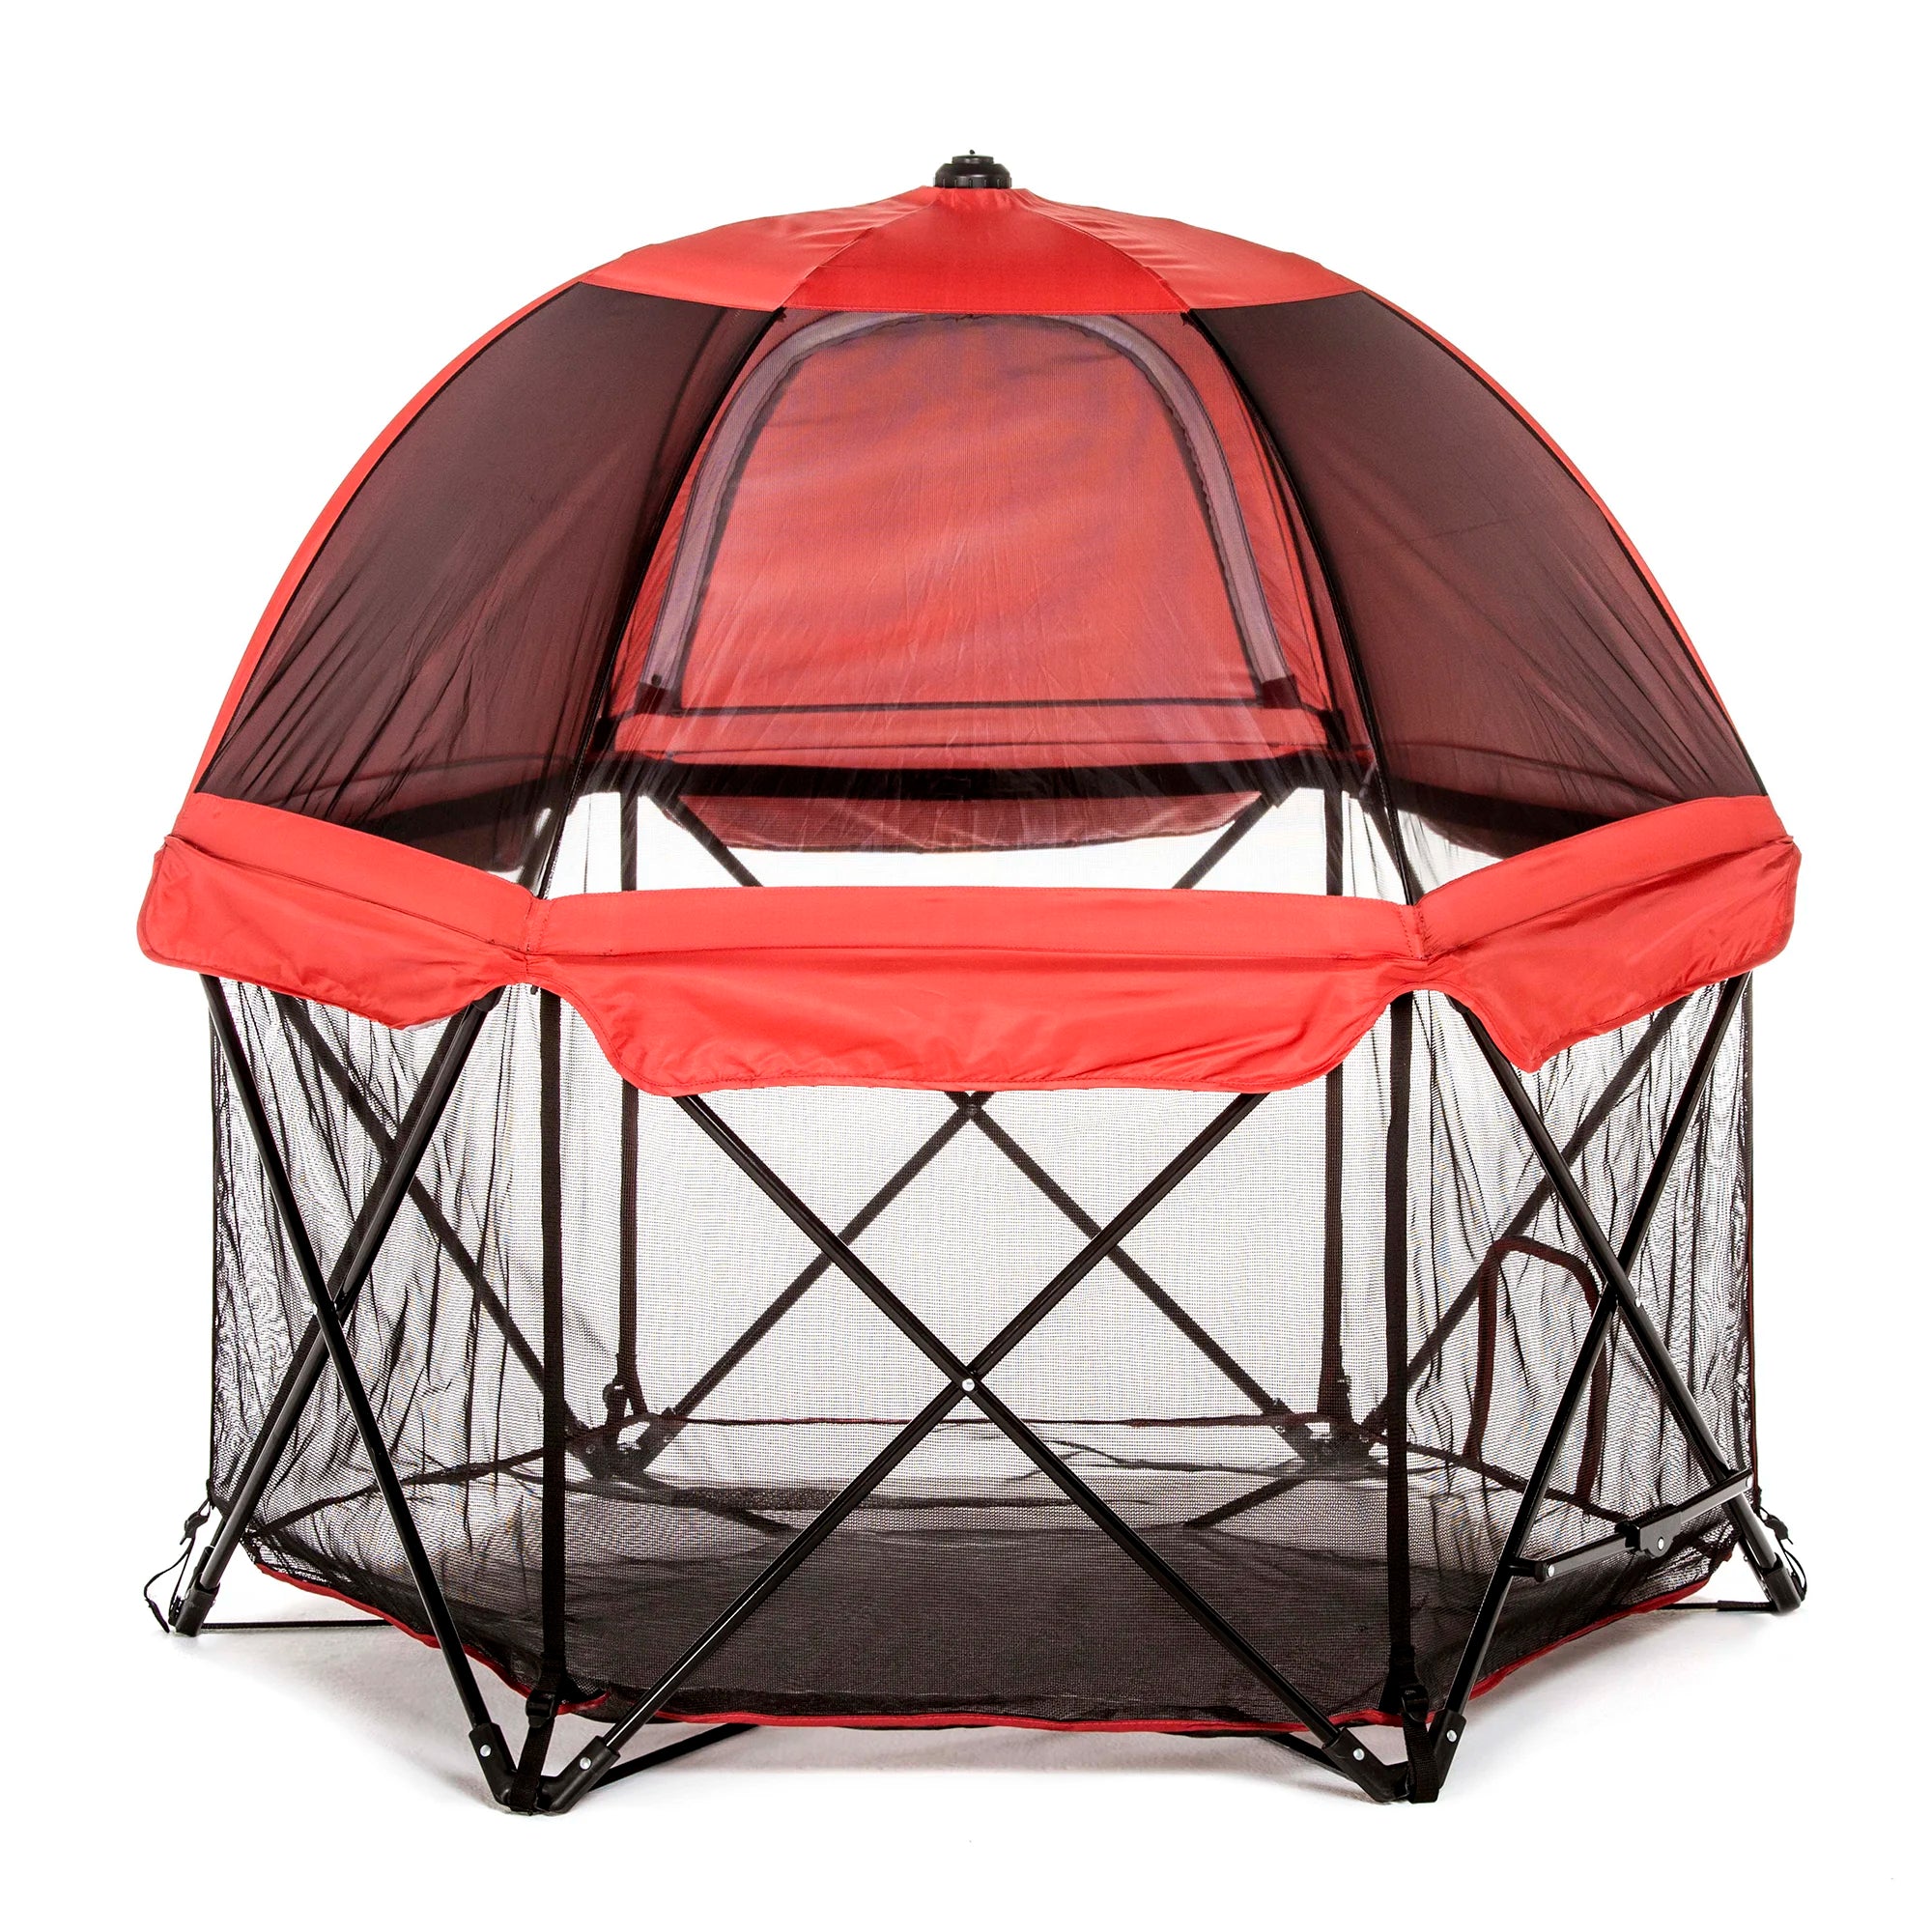 Portable Pet Pen with Canopy on White Background.